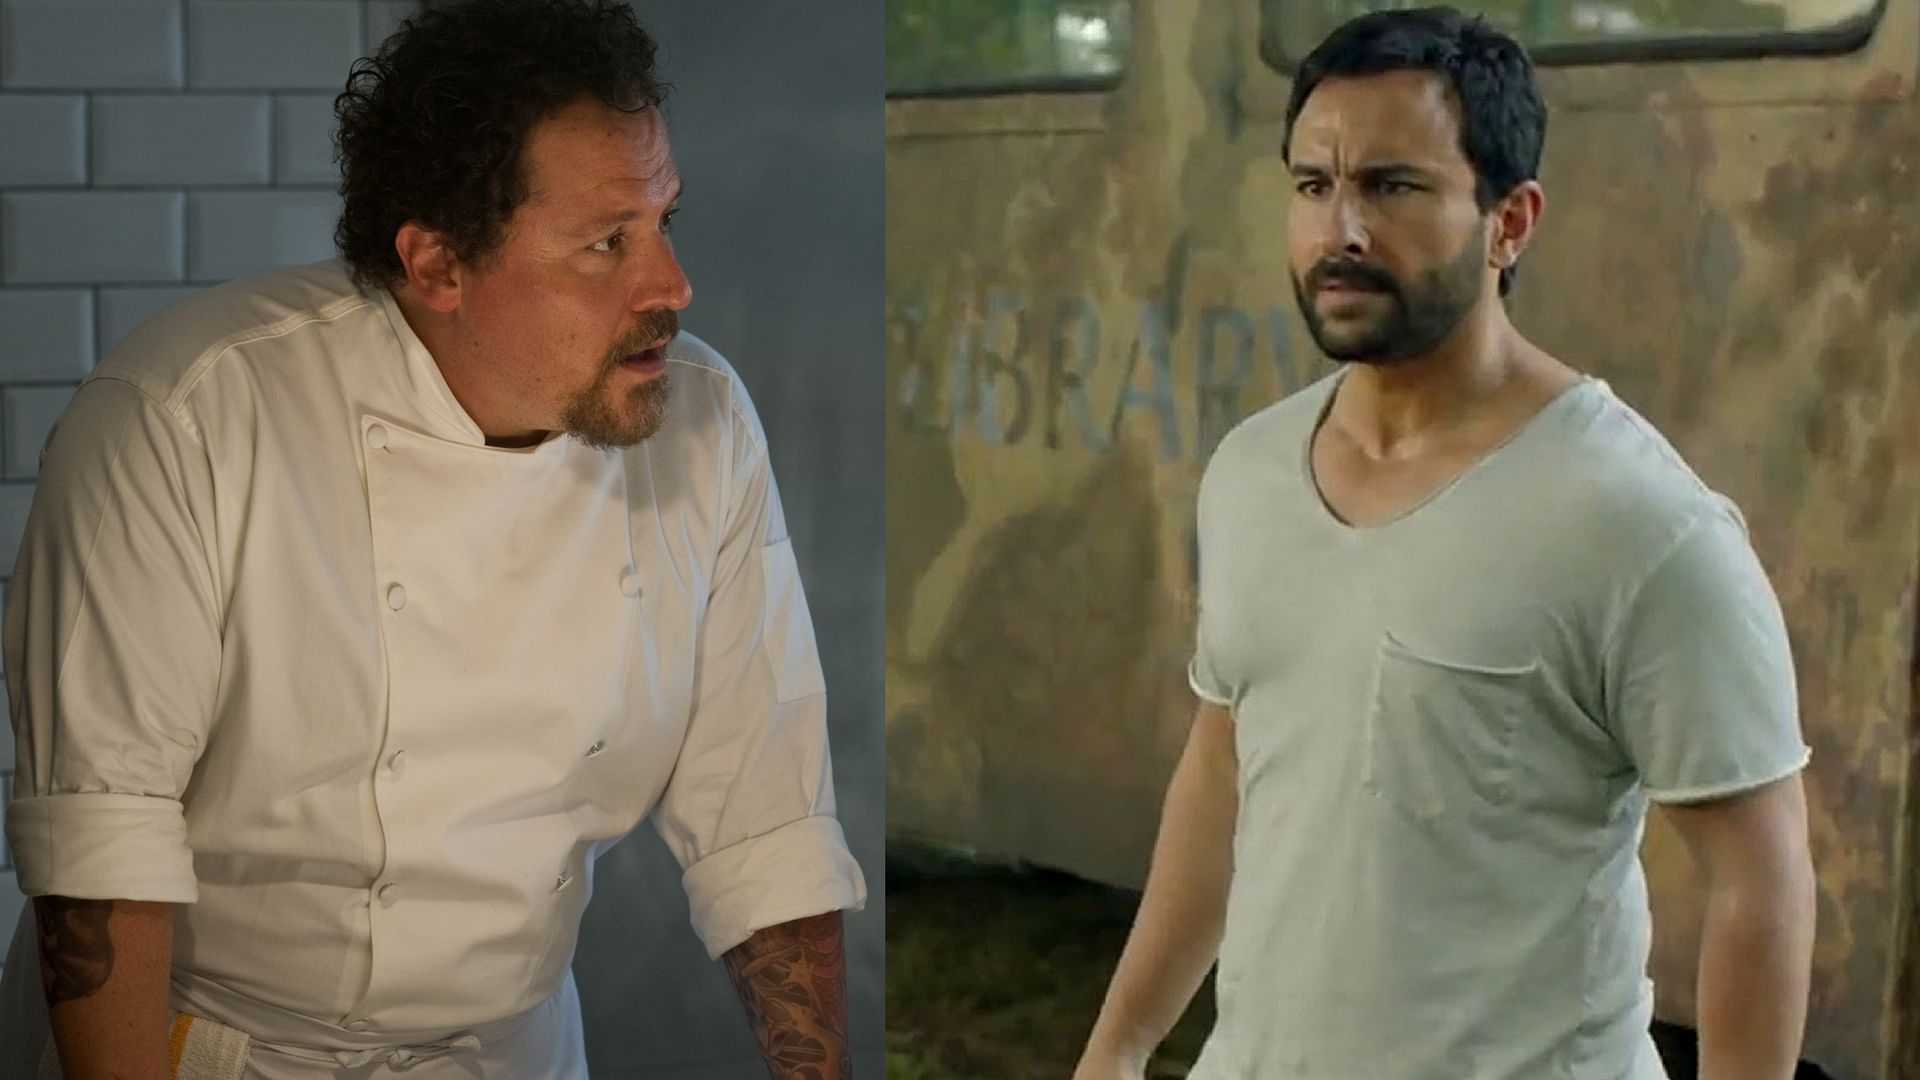 Though Bollywood’s ‘Chef’ isn’t a remake of the Hollywood original, here’s why it lacks heart in comparison.&nbsp;